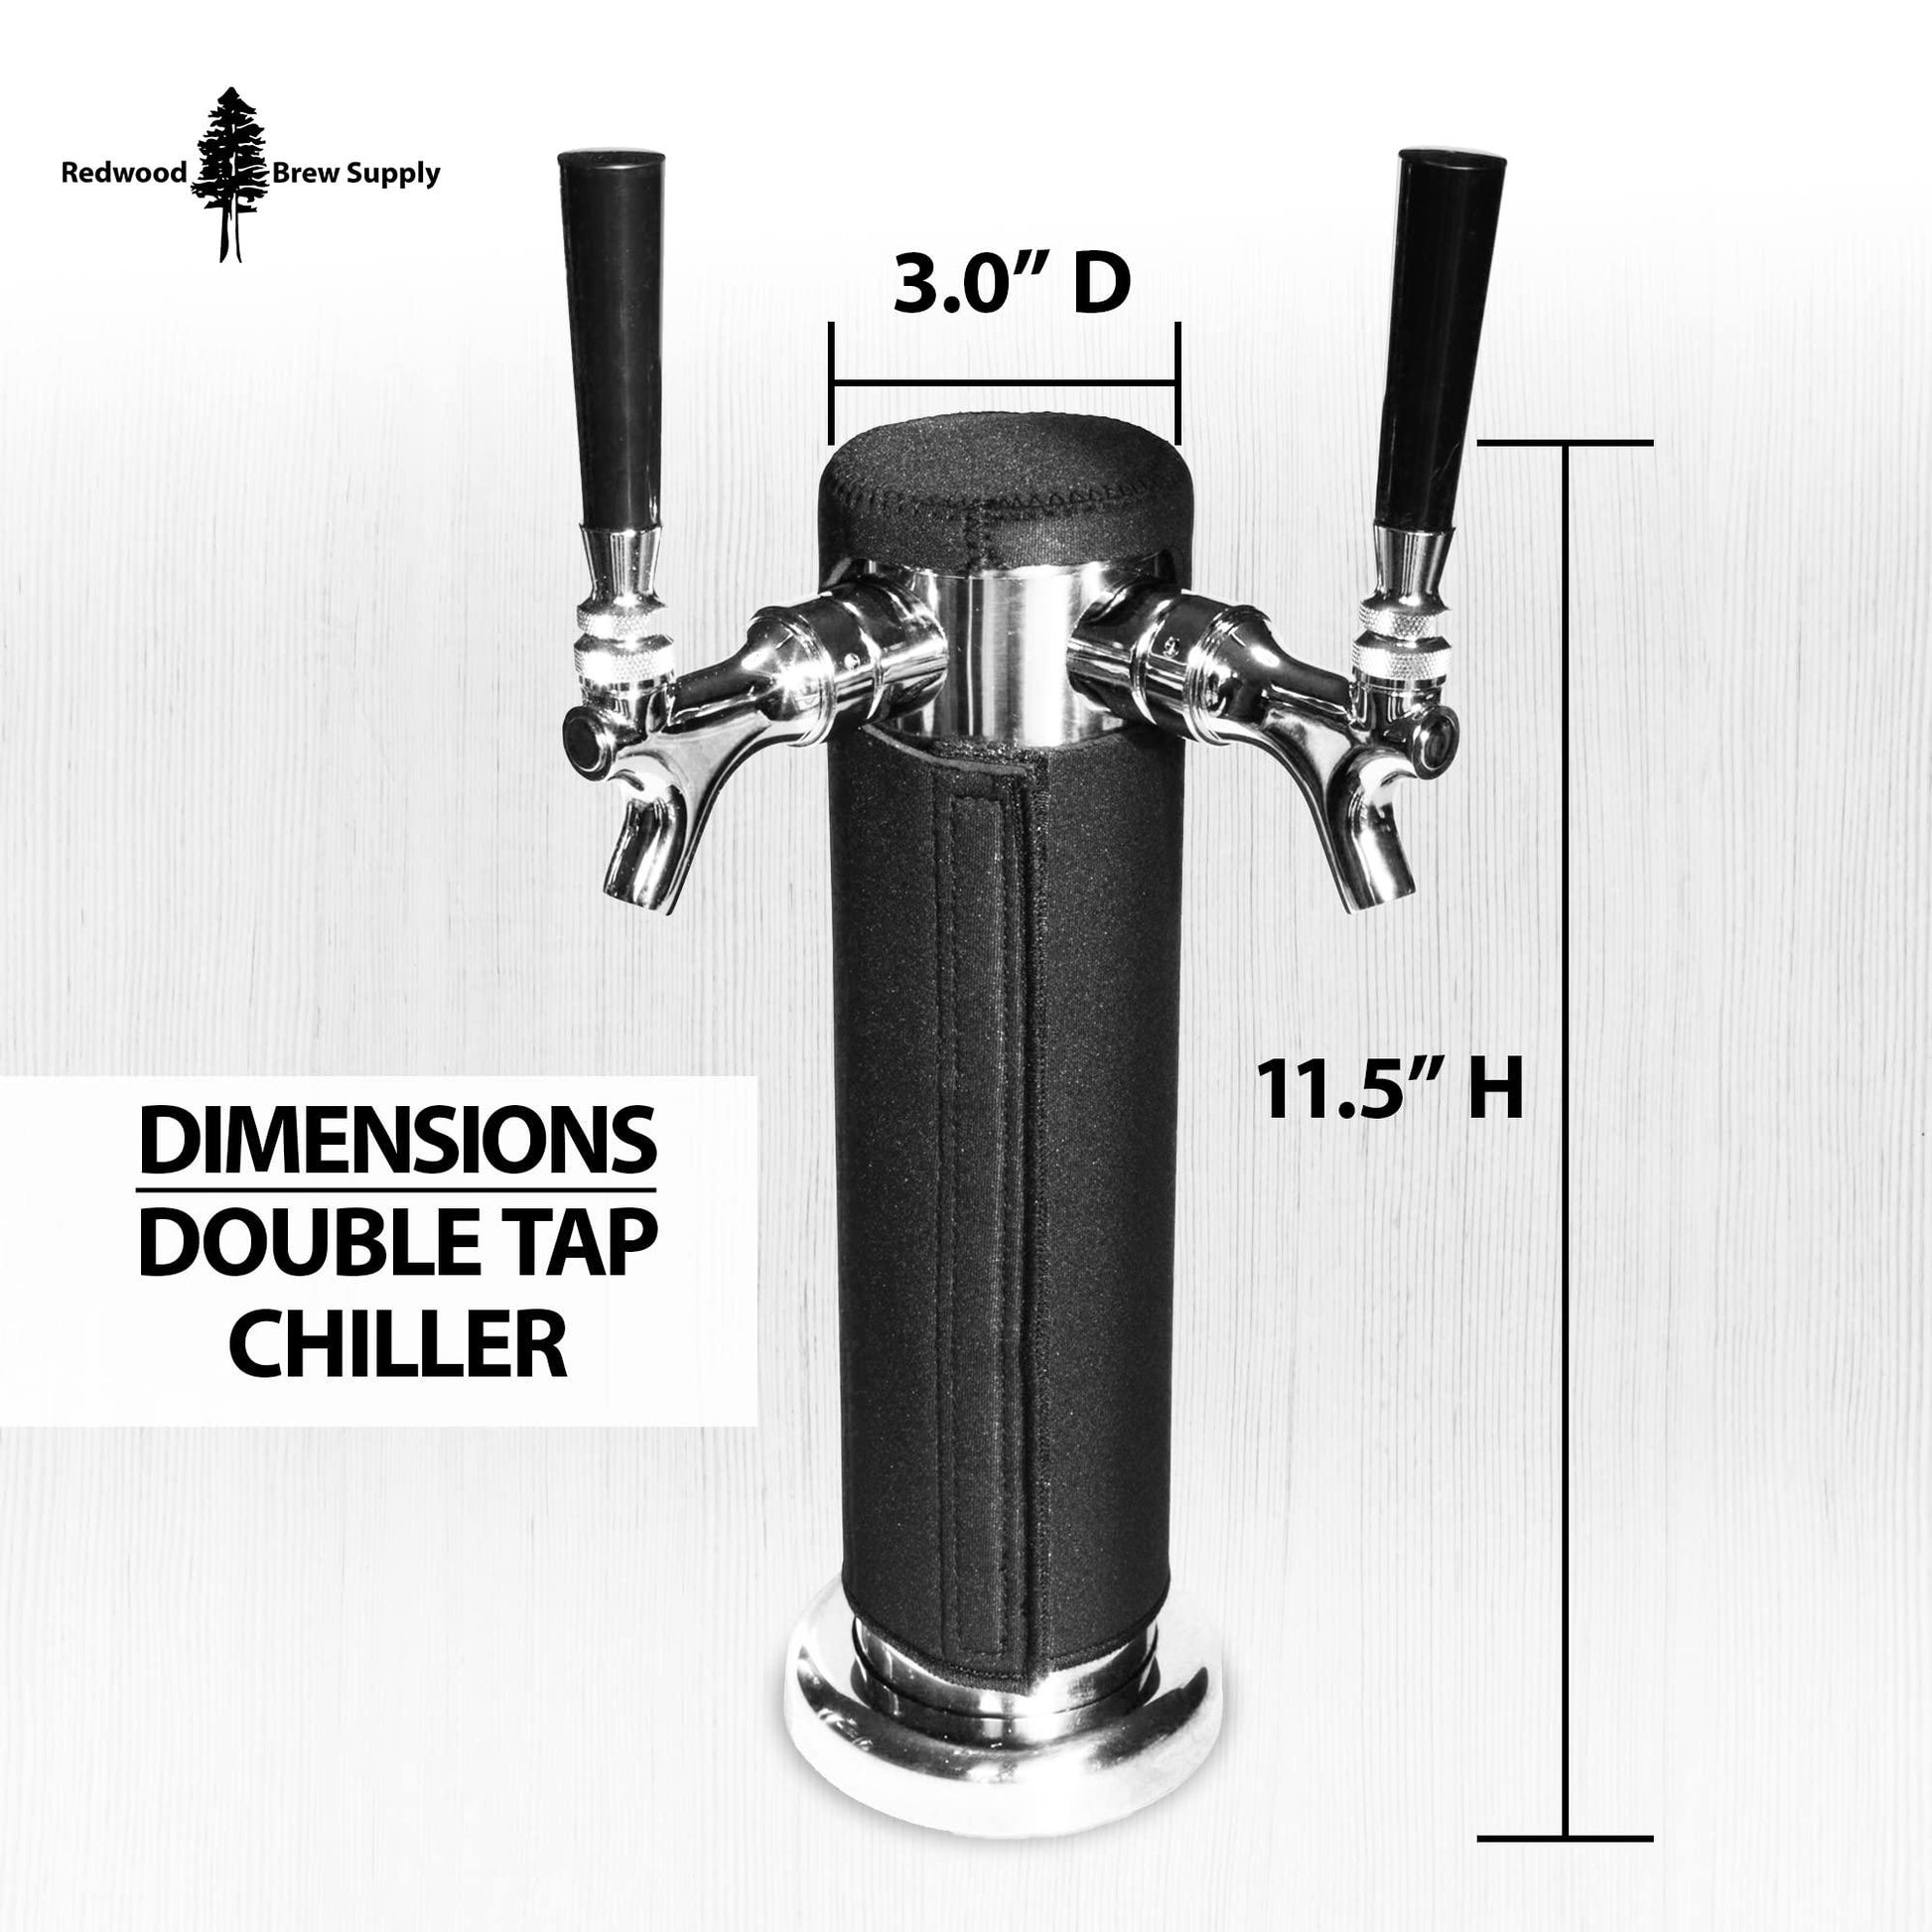 Kegerator Tower Insulator for Beer Tower - Neoprene Design - Perfect Fit for Kegerator Tap Tower - Easy to Use Beer Tower Cooler Accessory (3.0" Diameter Beer Tower) - CookCave